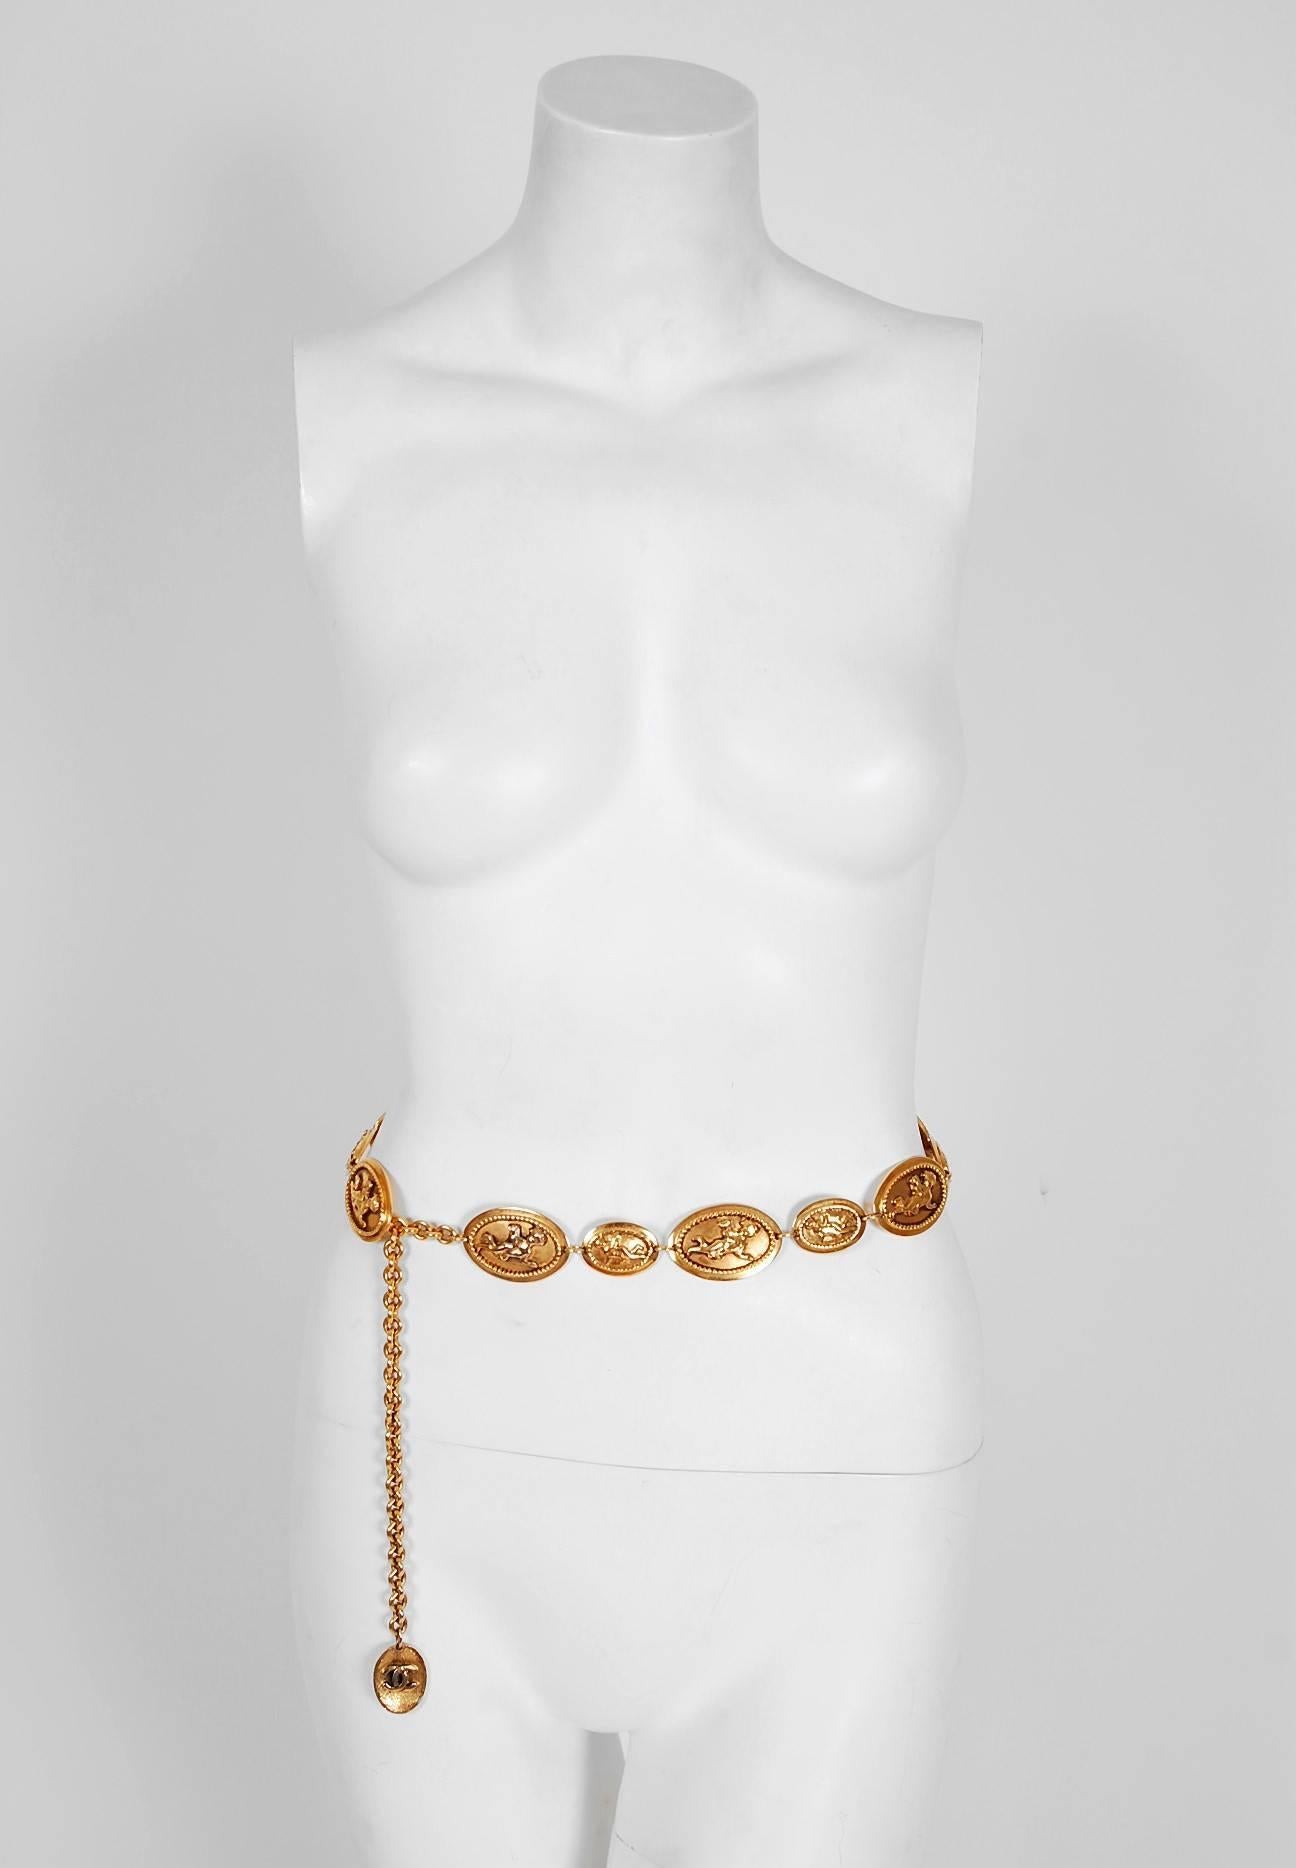 Chanel is known to be one of the most luxurious and decadent fashion houses in the world. This breathtaking gold-toned chain link belt is a perfect example of why this couture brand has stood the test of time. I adore the over-sized cherub angels